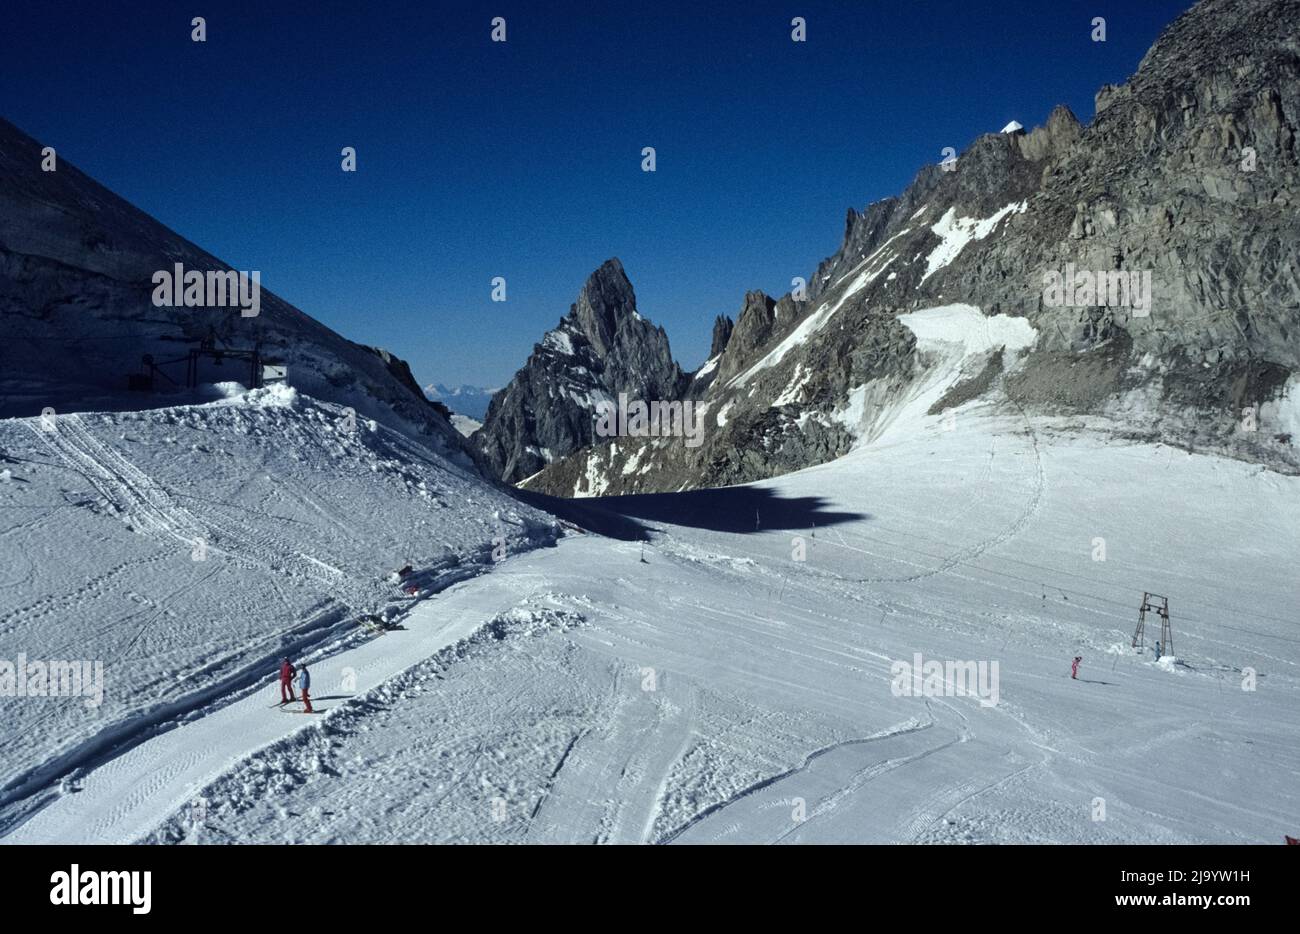 Panorama on the Pointe Helbronner. Summer ski area with ski lift, slope and skiers on the Glacier du Géant. Mont Blanc massif, France/Italy, 1990 Stock Photo